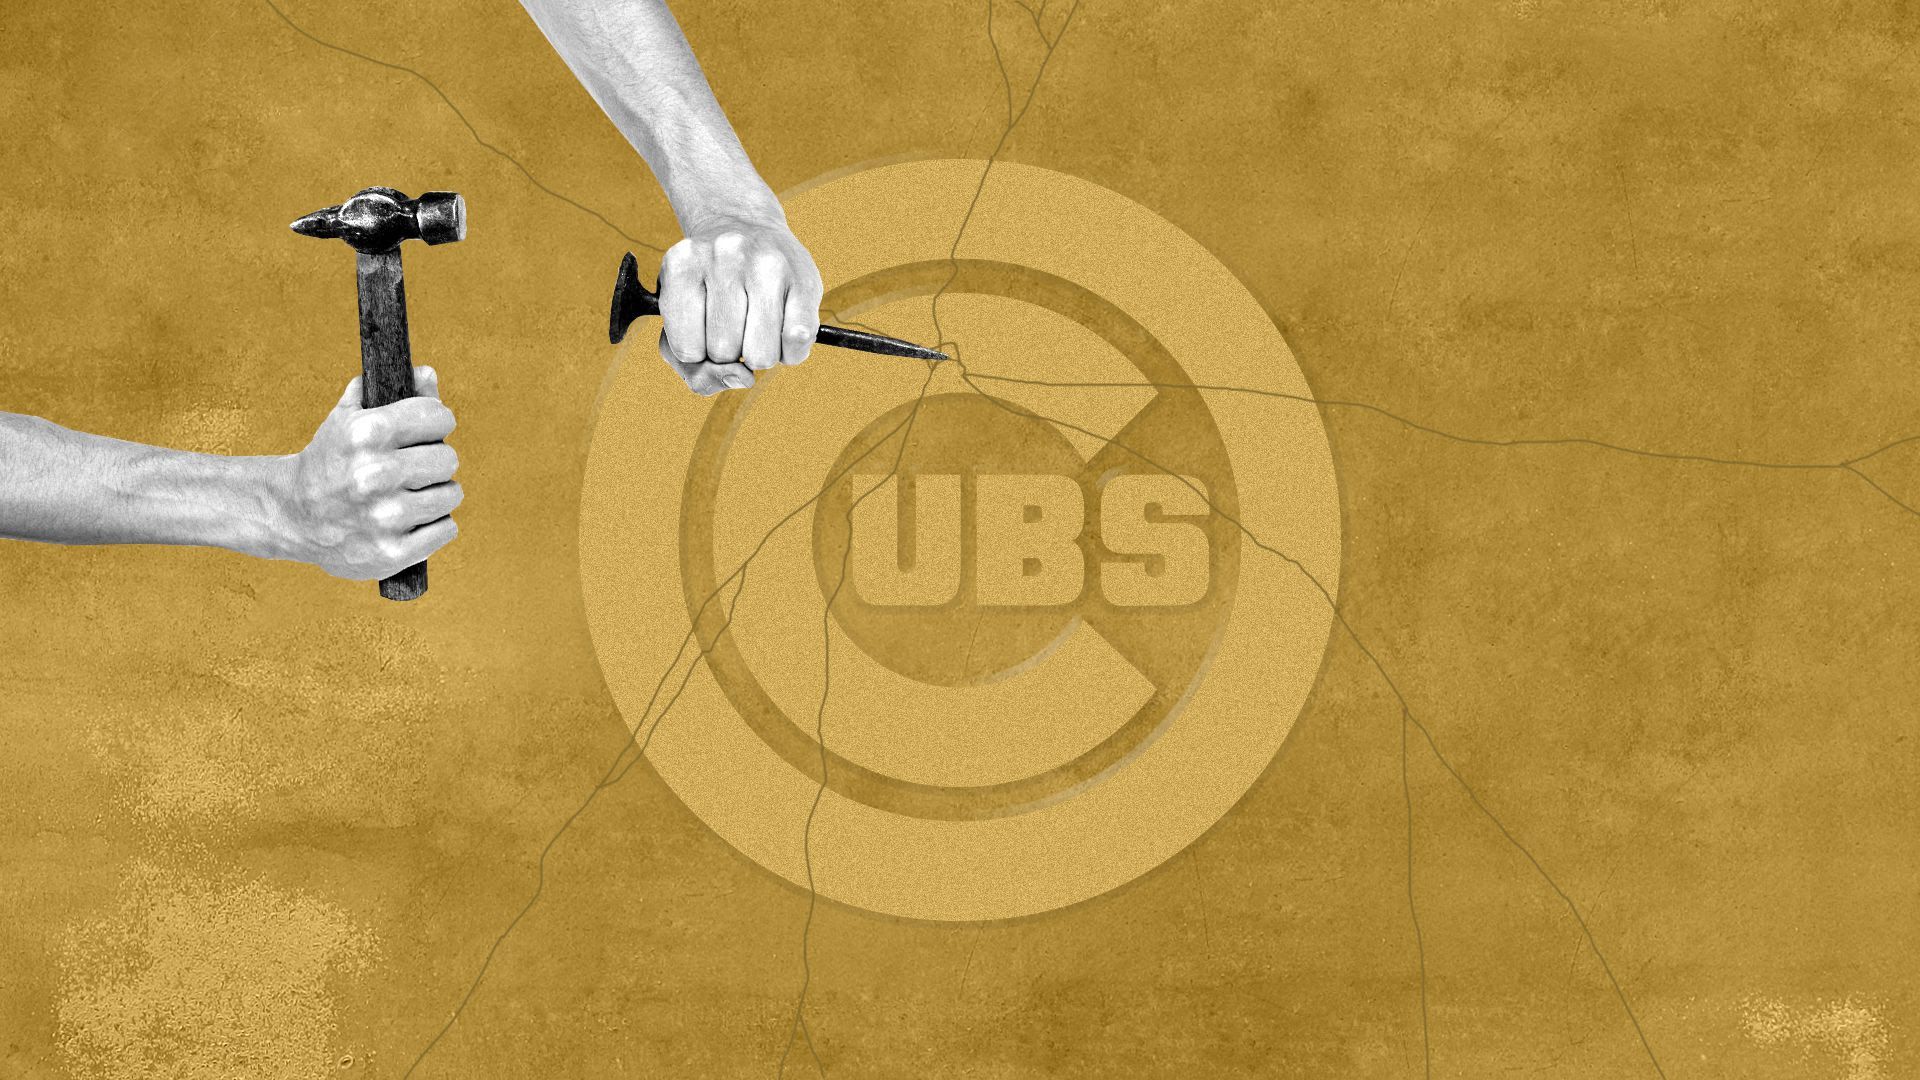 Illustration of a hand breaking apart a Cubs logo